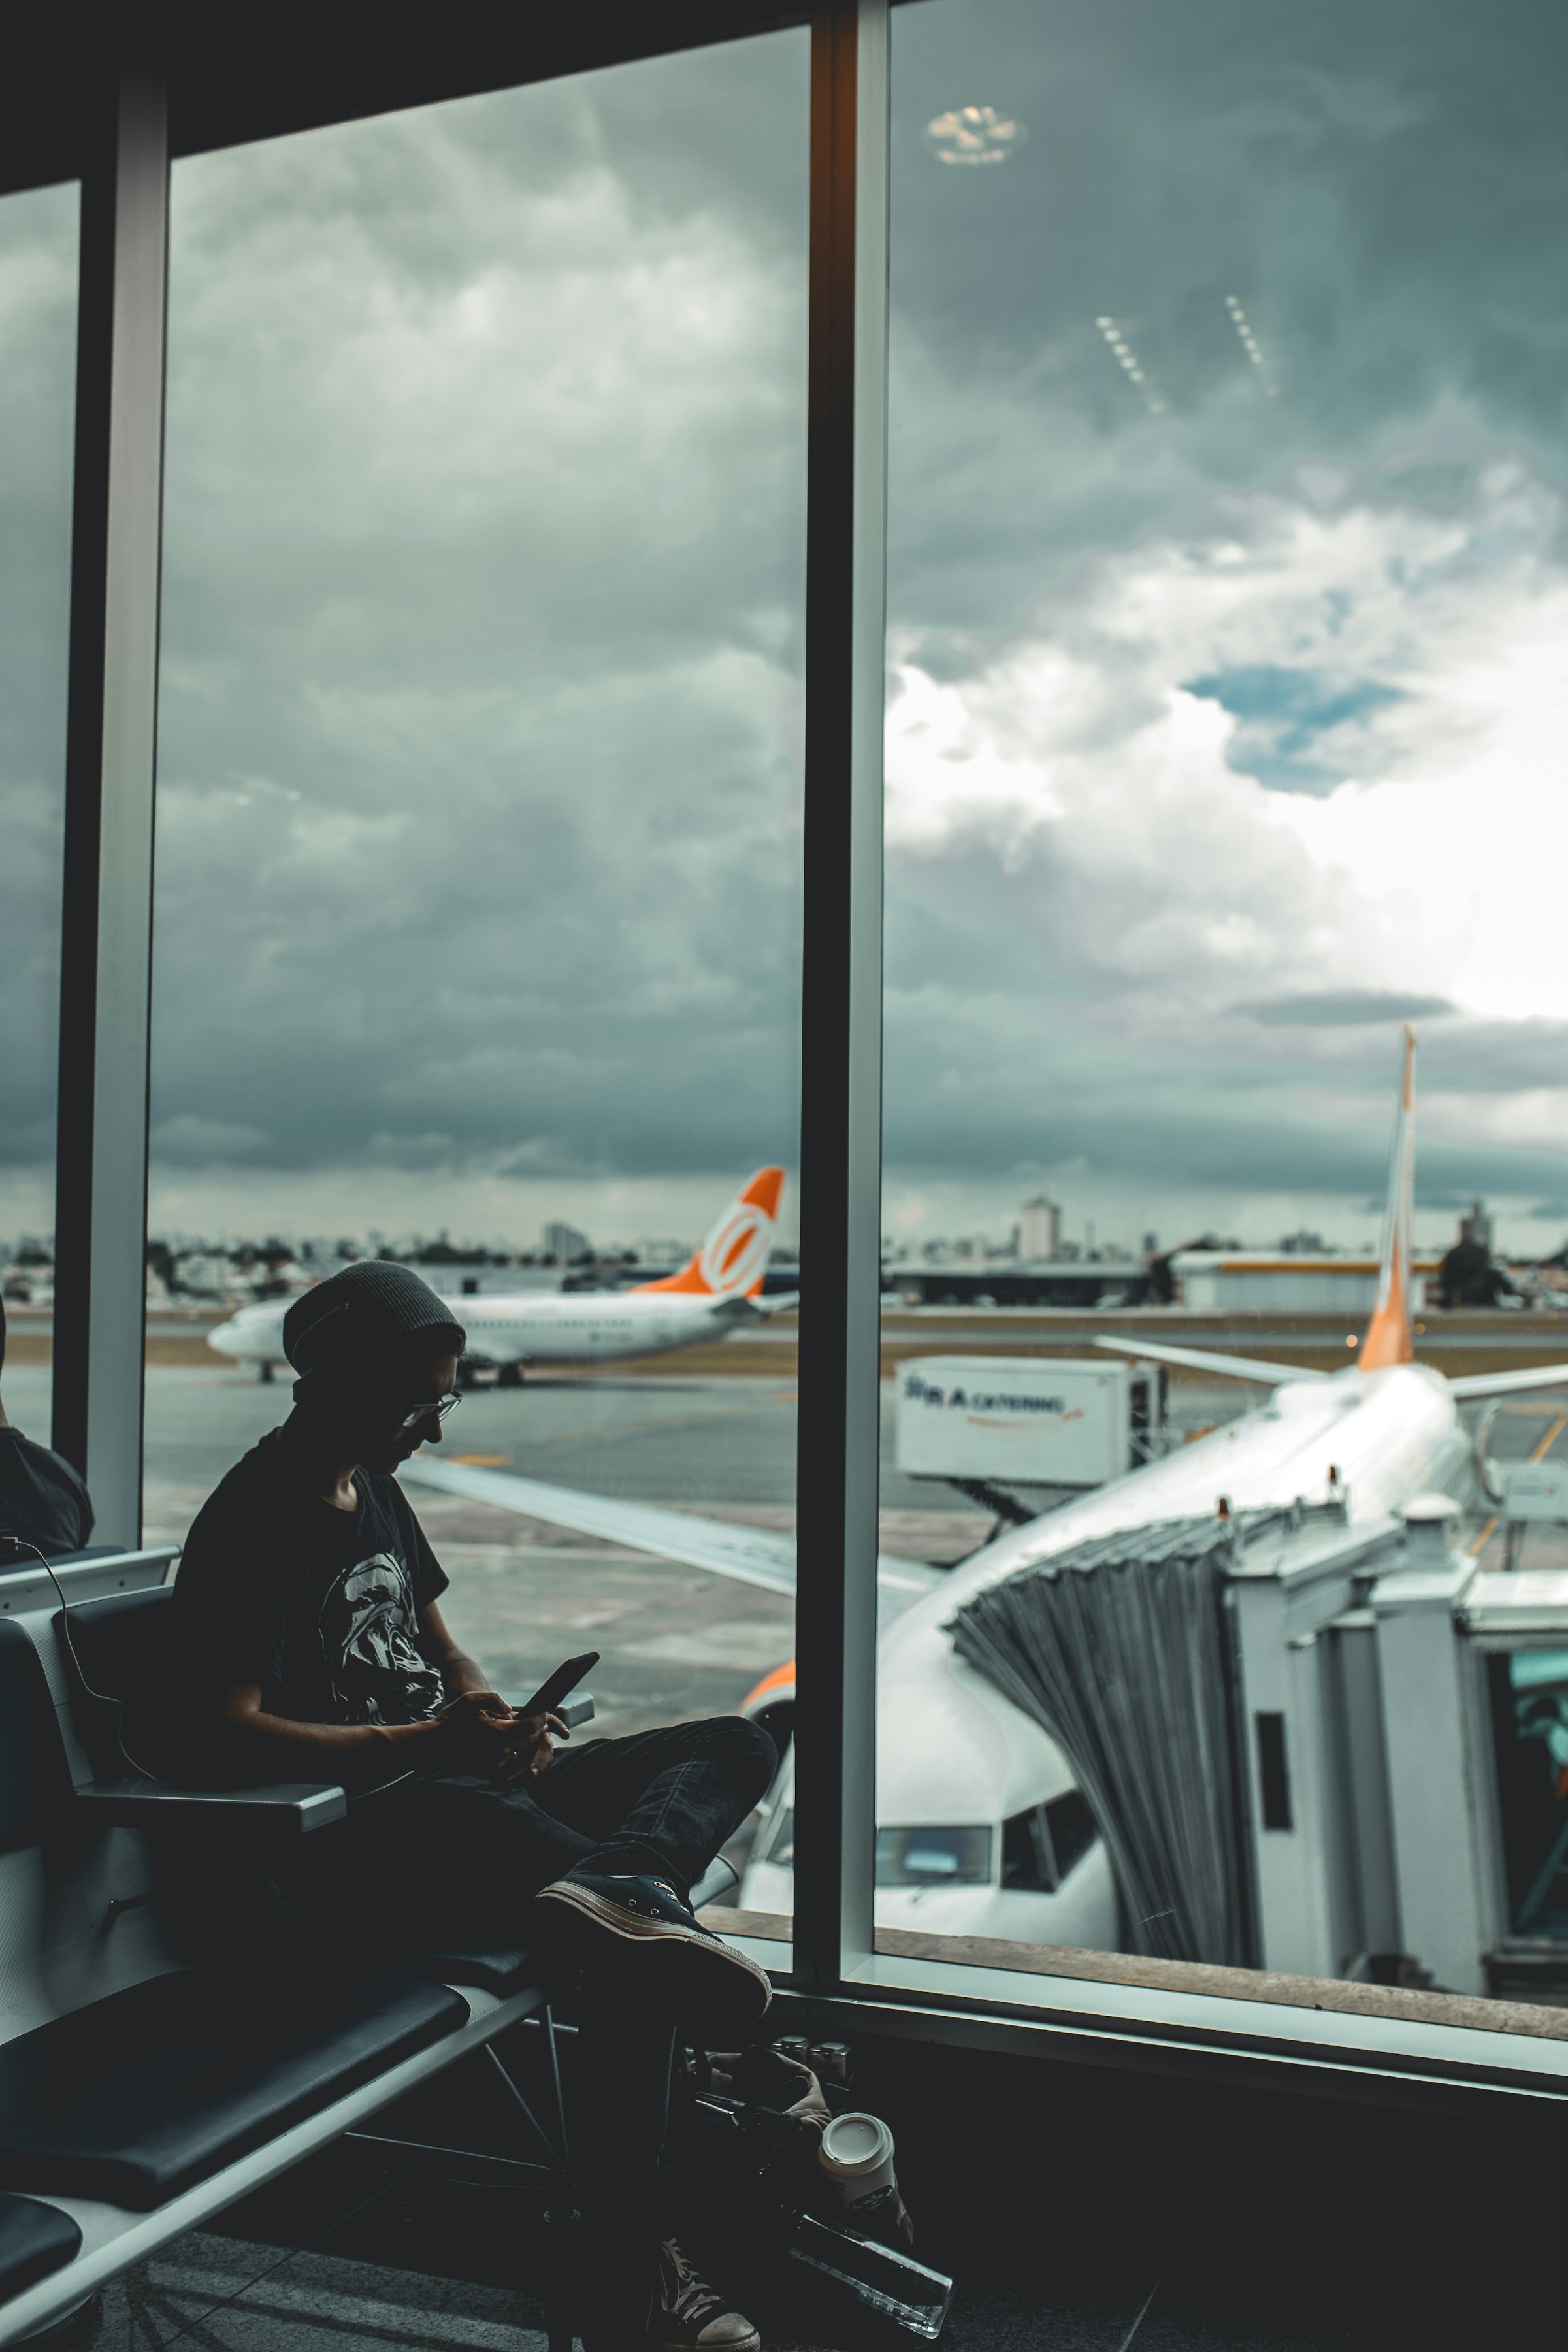 A person sitting at the airport | Source: Unsplash